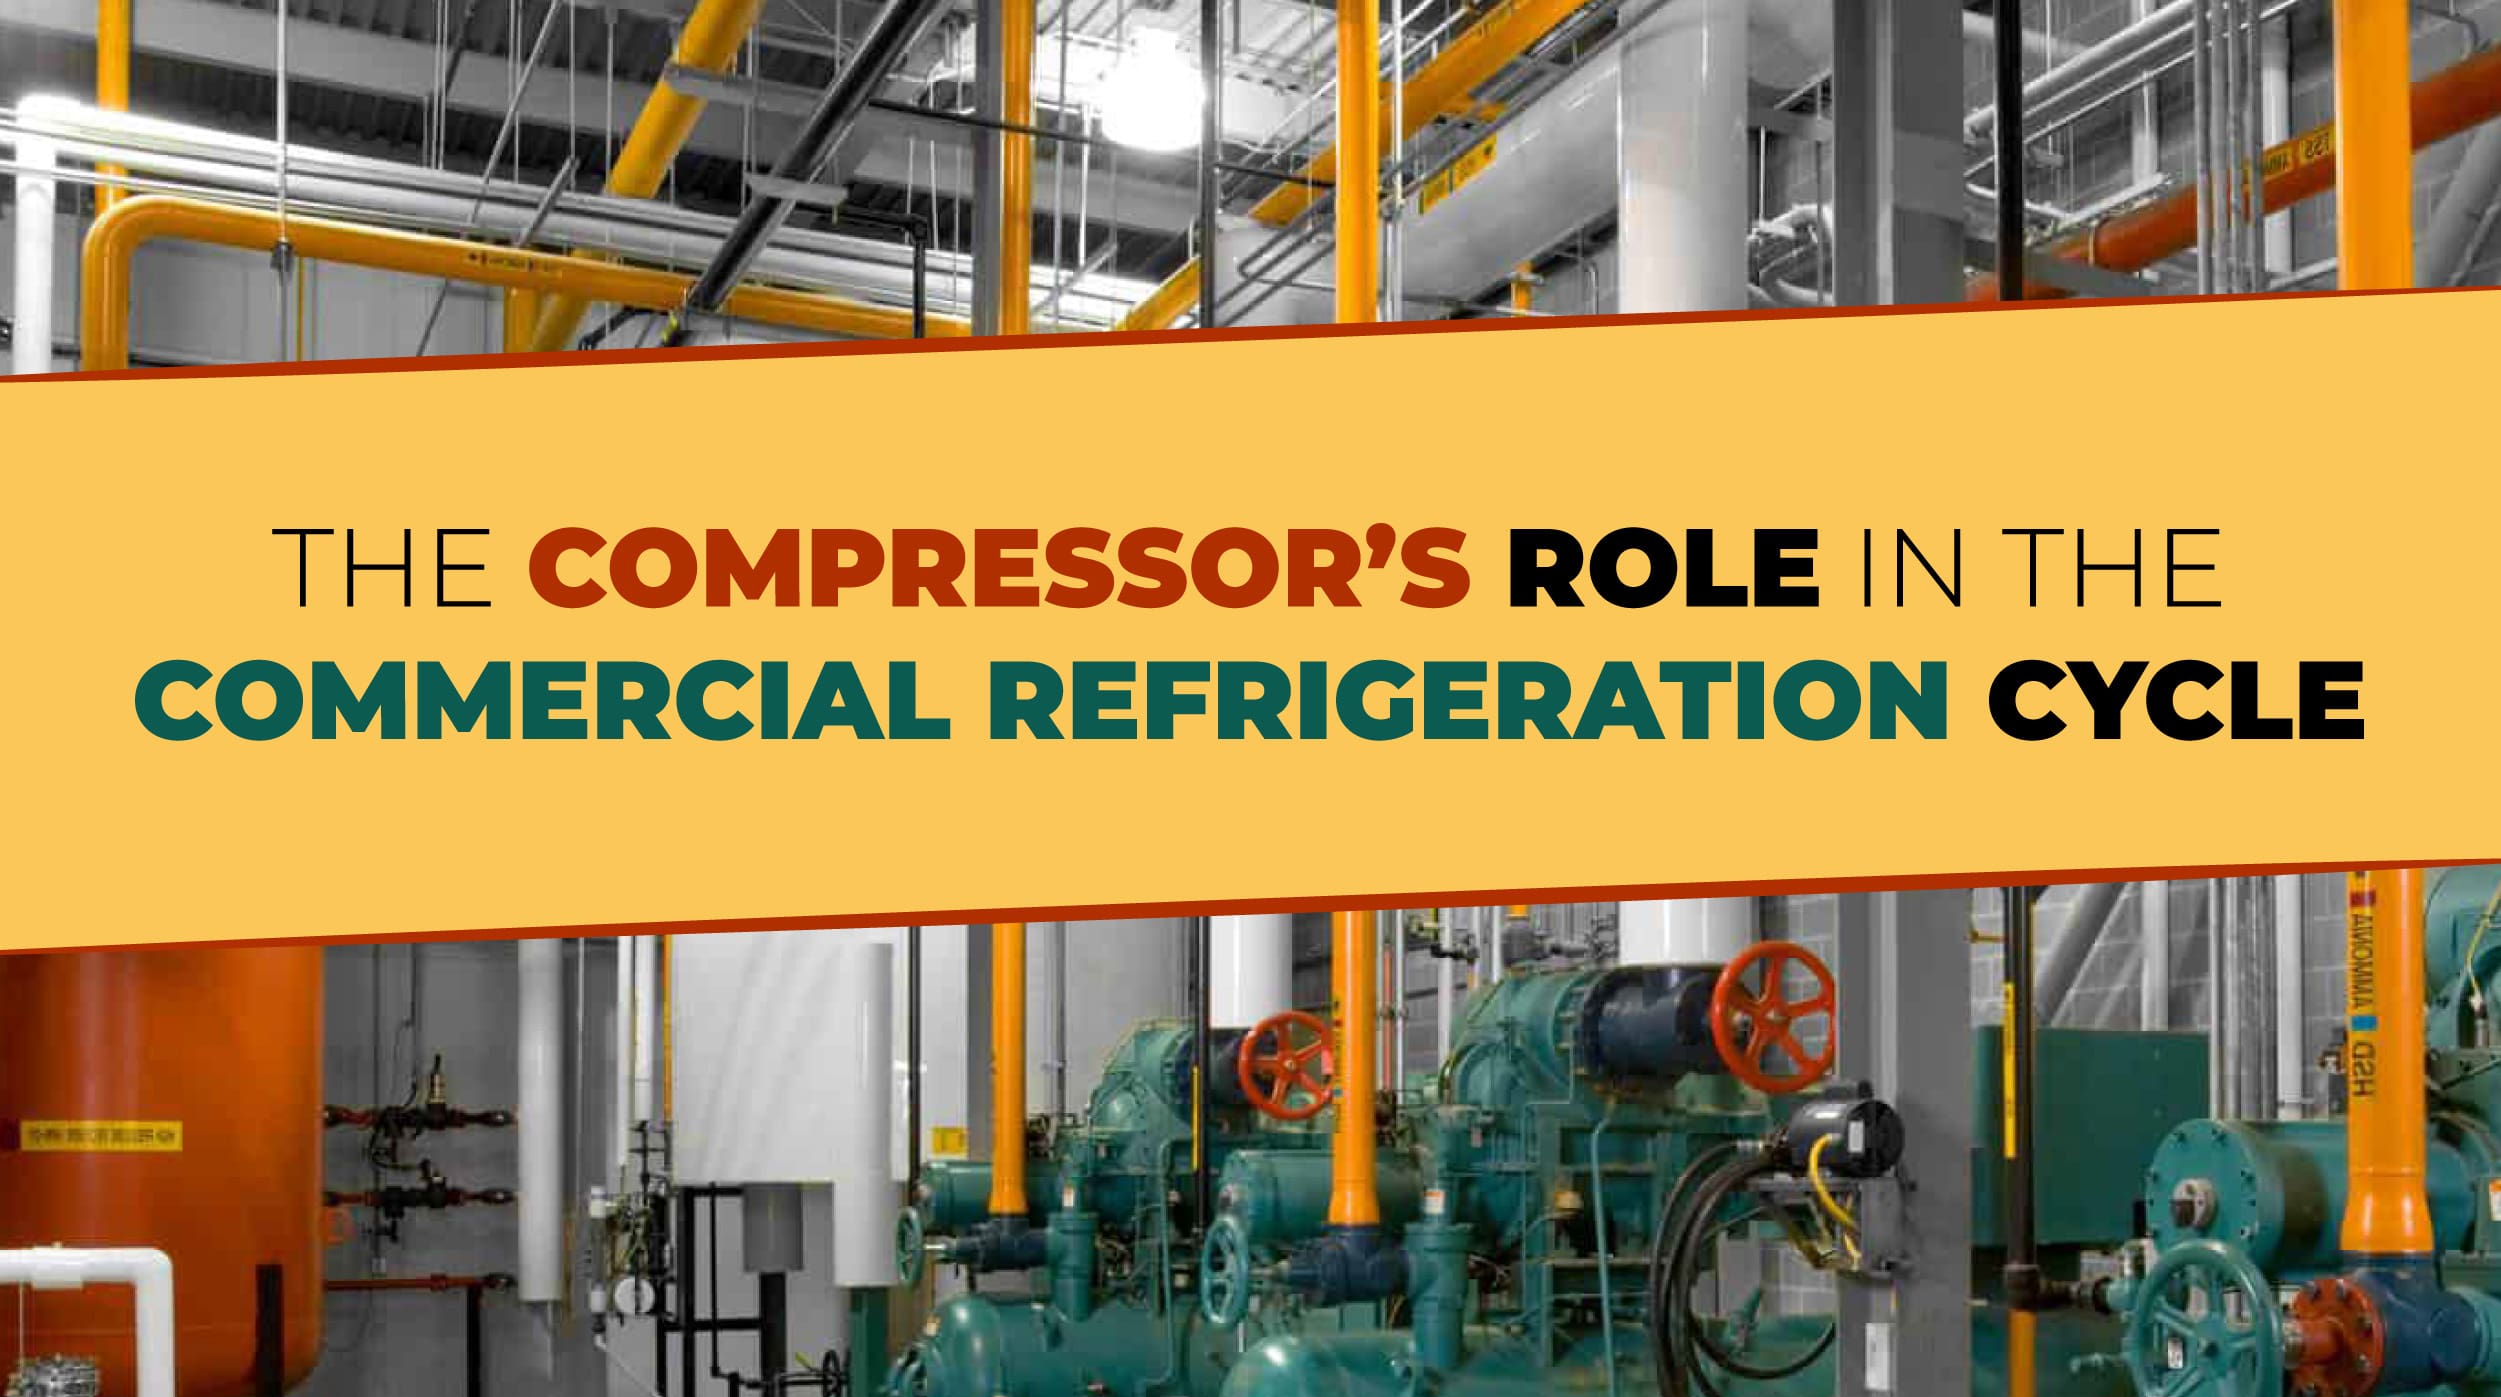 Compressor's Role in the Commercial Refrigeration Cycle